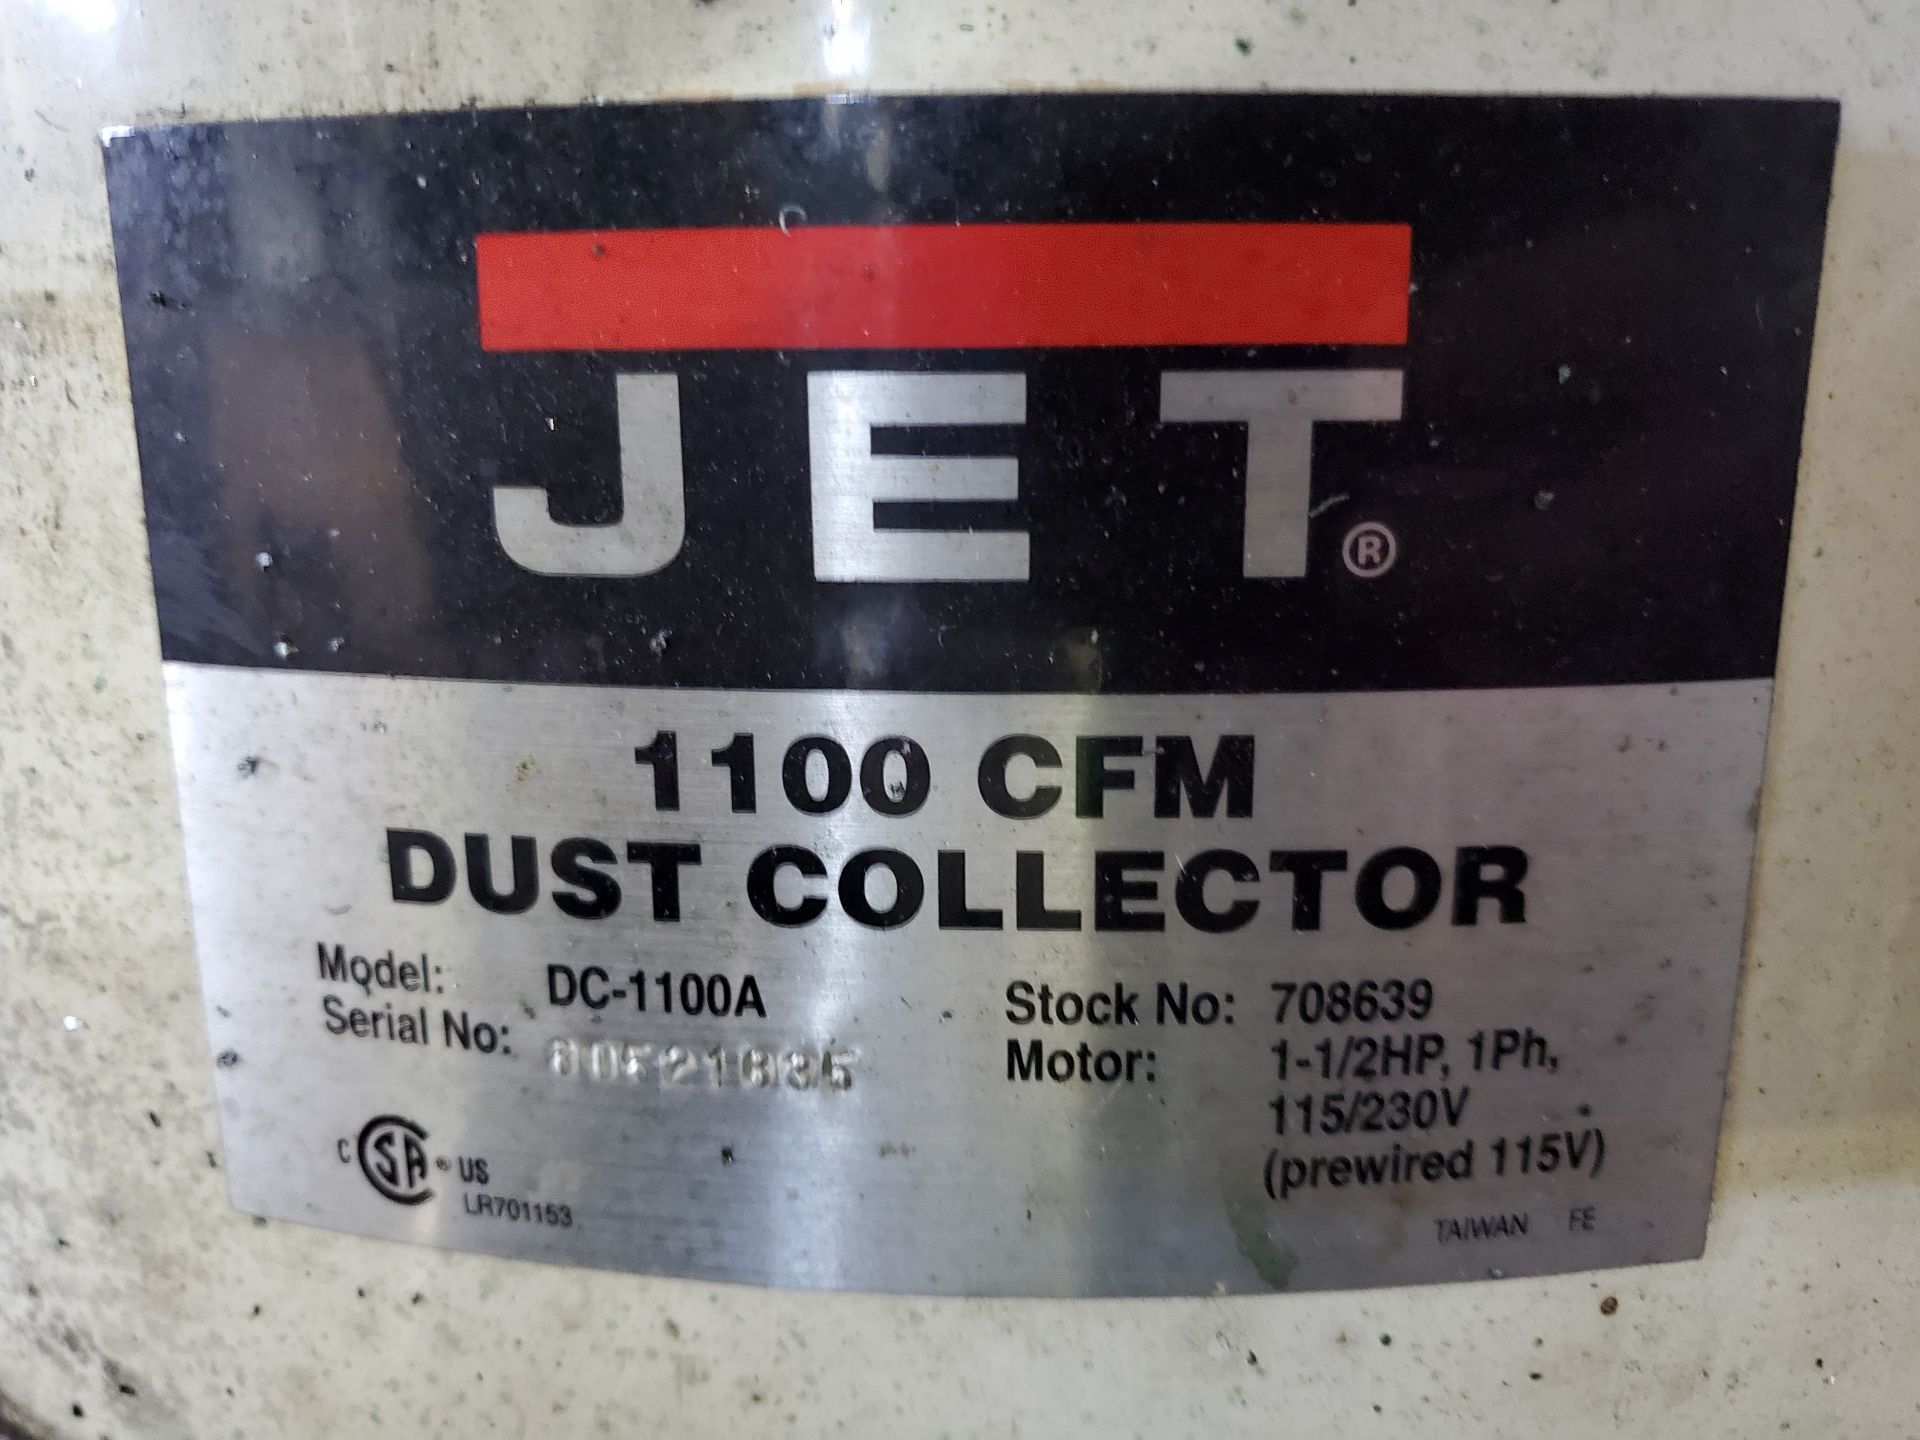 JET 1.5 HP PORTABLE DUST COLLECTOR, MODEL DC-1100A, SINGLE PHASE, ON TRANSFER CART - Image 6 of 6